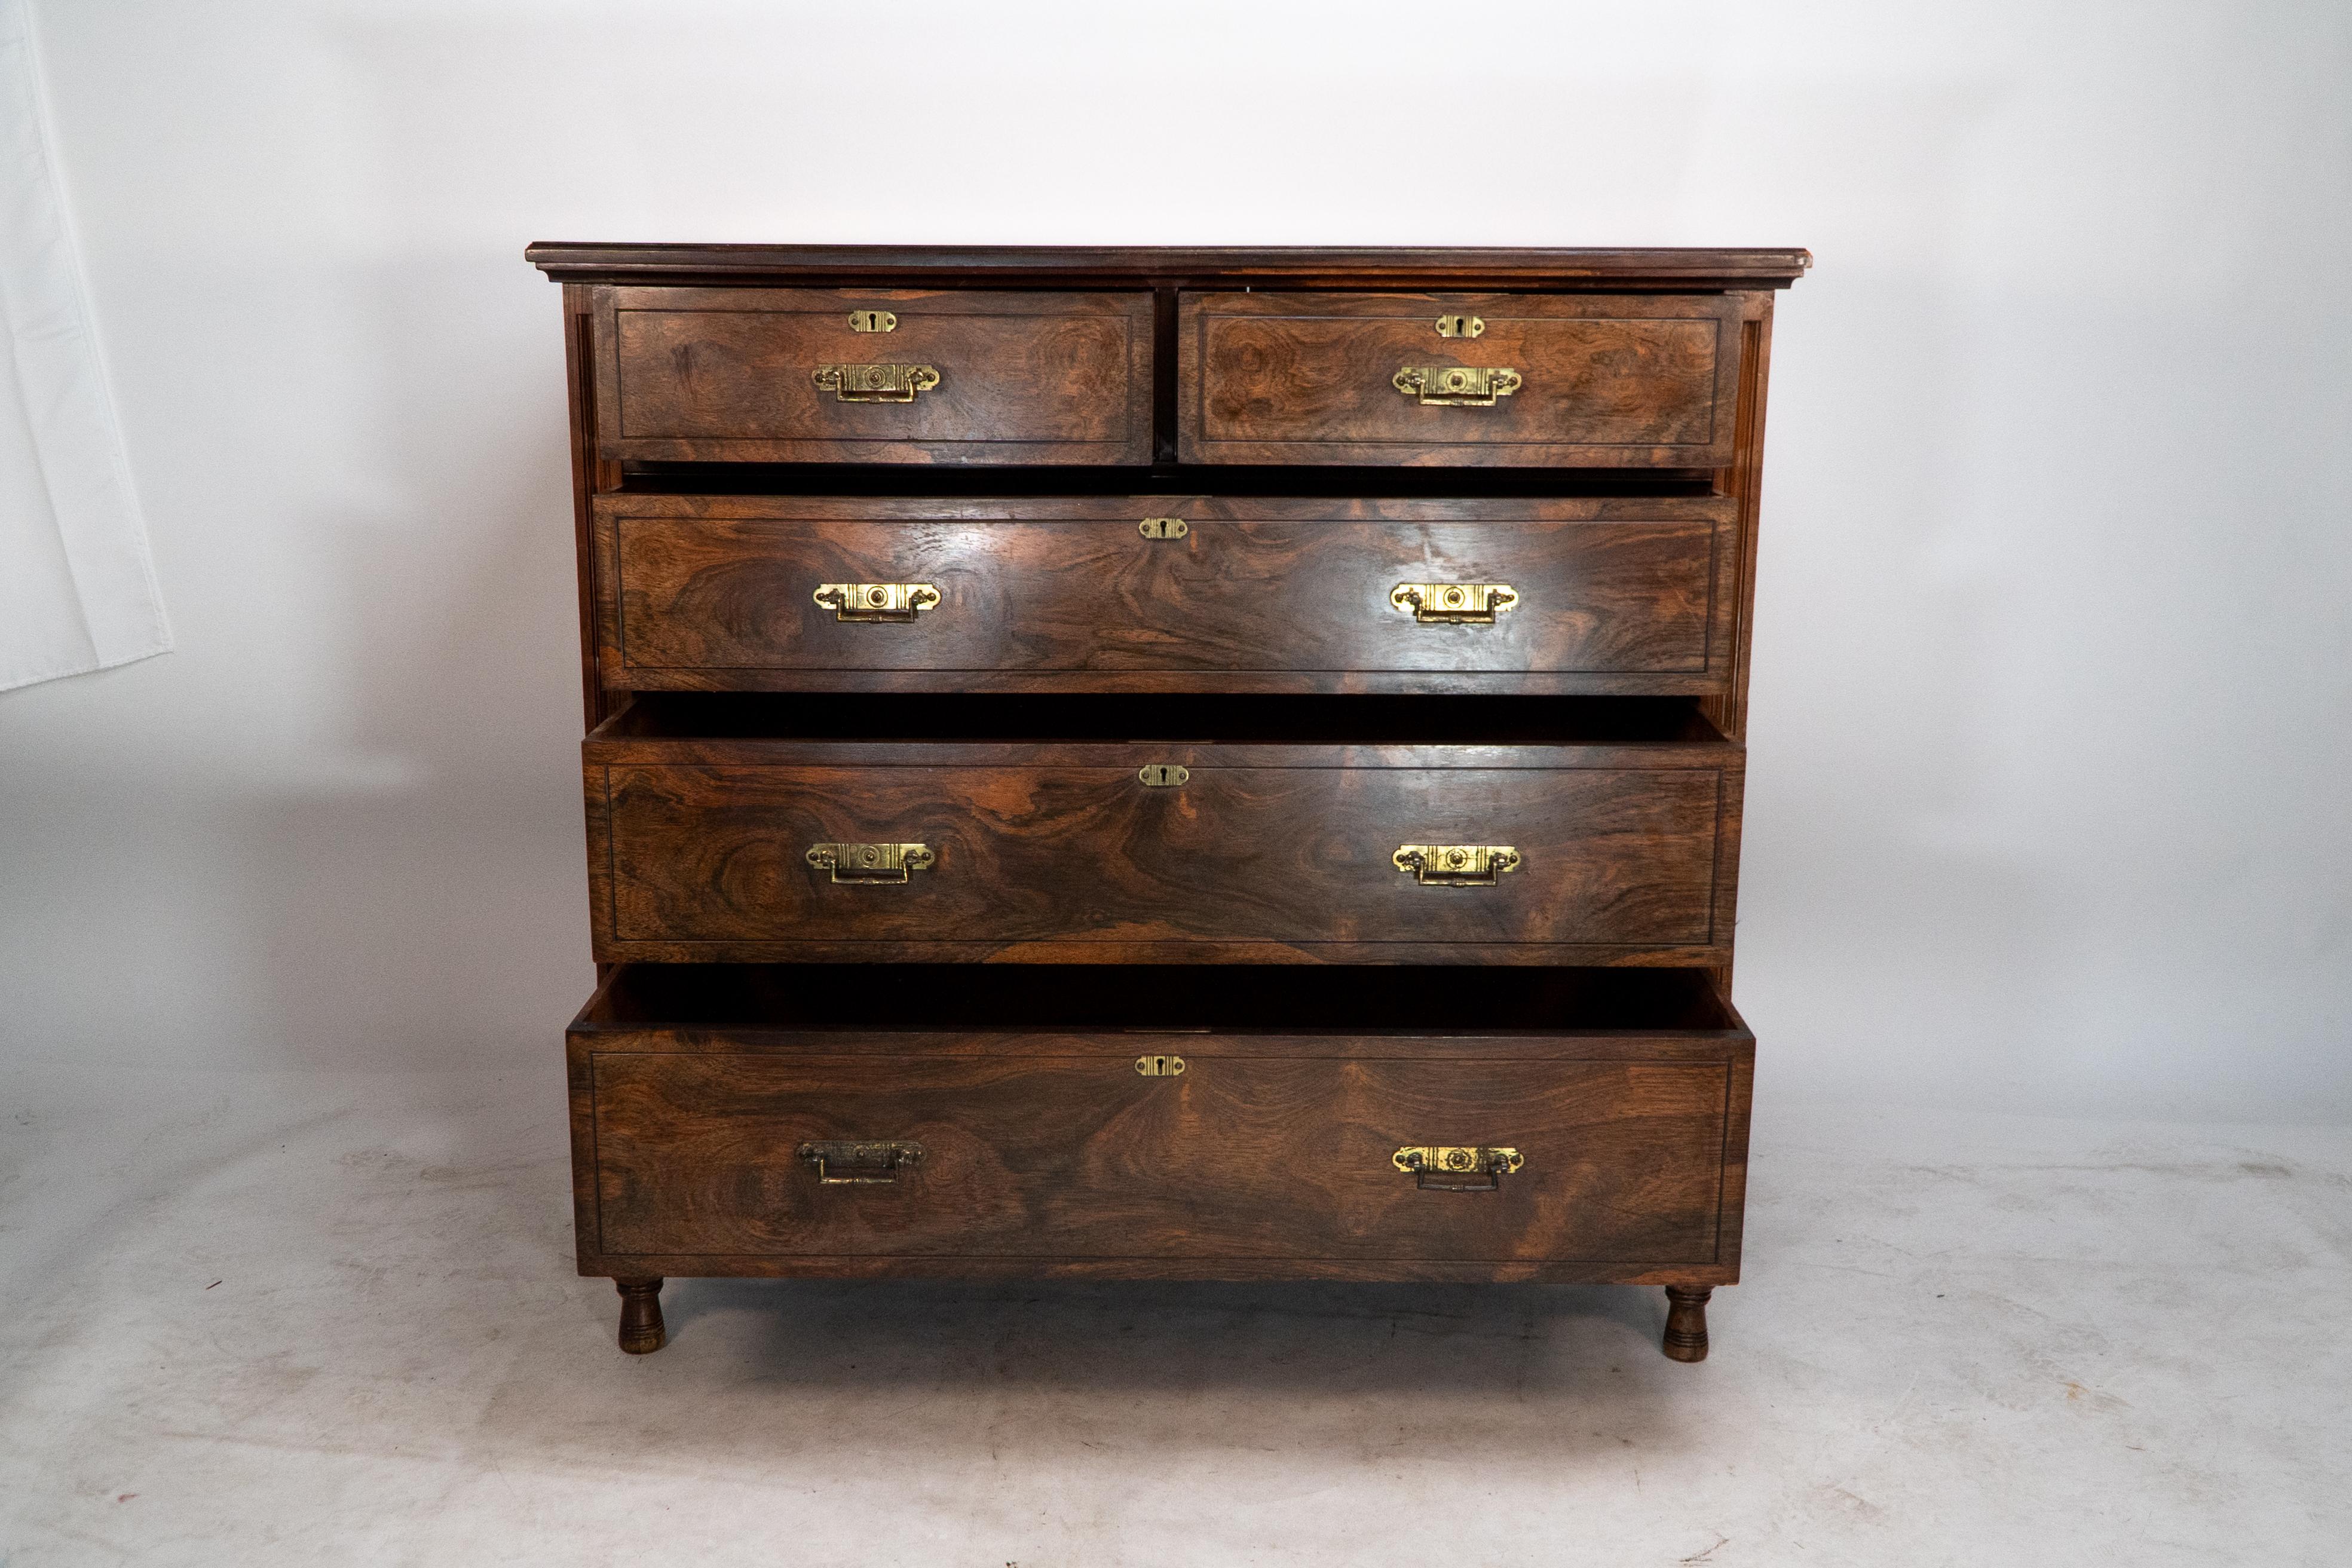 Maple and Co London, in the style of Bruce Talbert. A good quality Aesthetic Movement chest of drawers made from Walnut with a wonderful wild figure to the grain. Molded decoration to the sides, brass handles, and escutcheons with an unusual row of